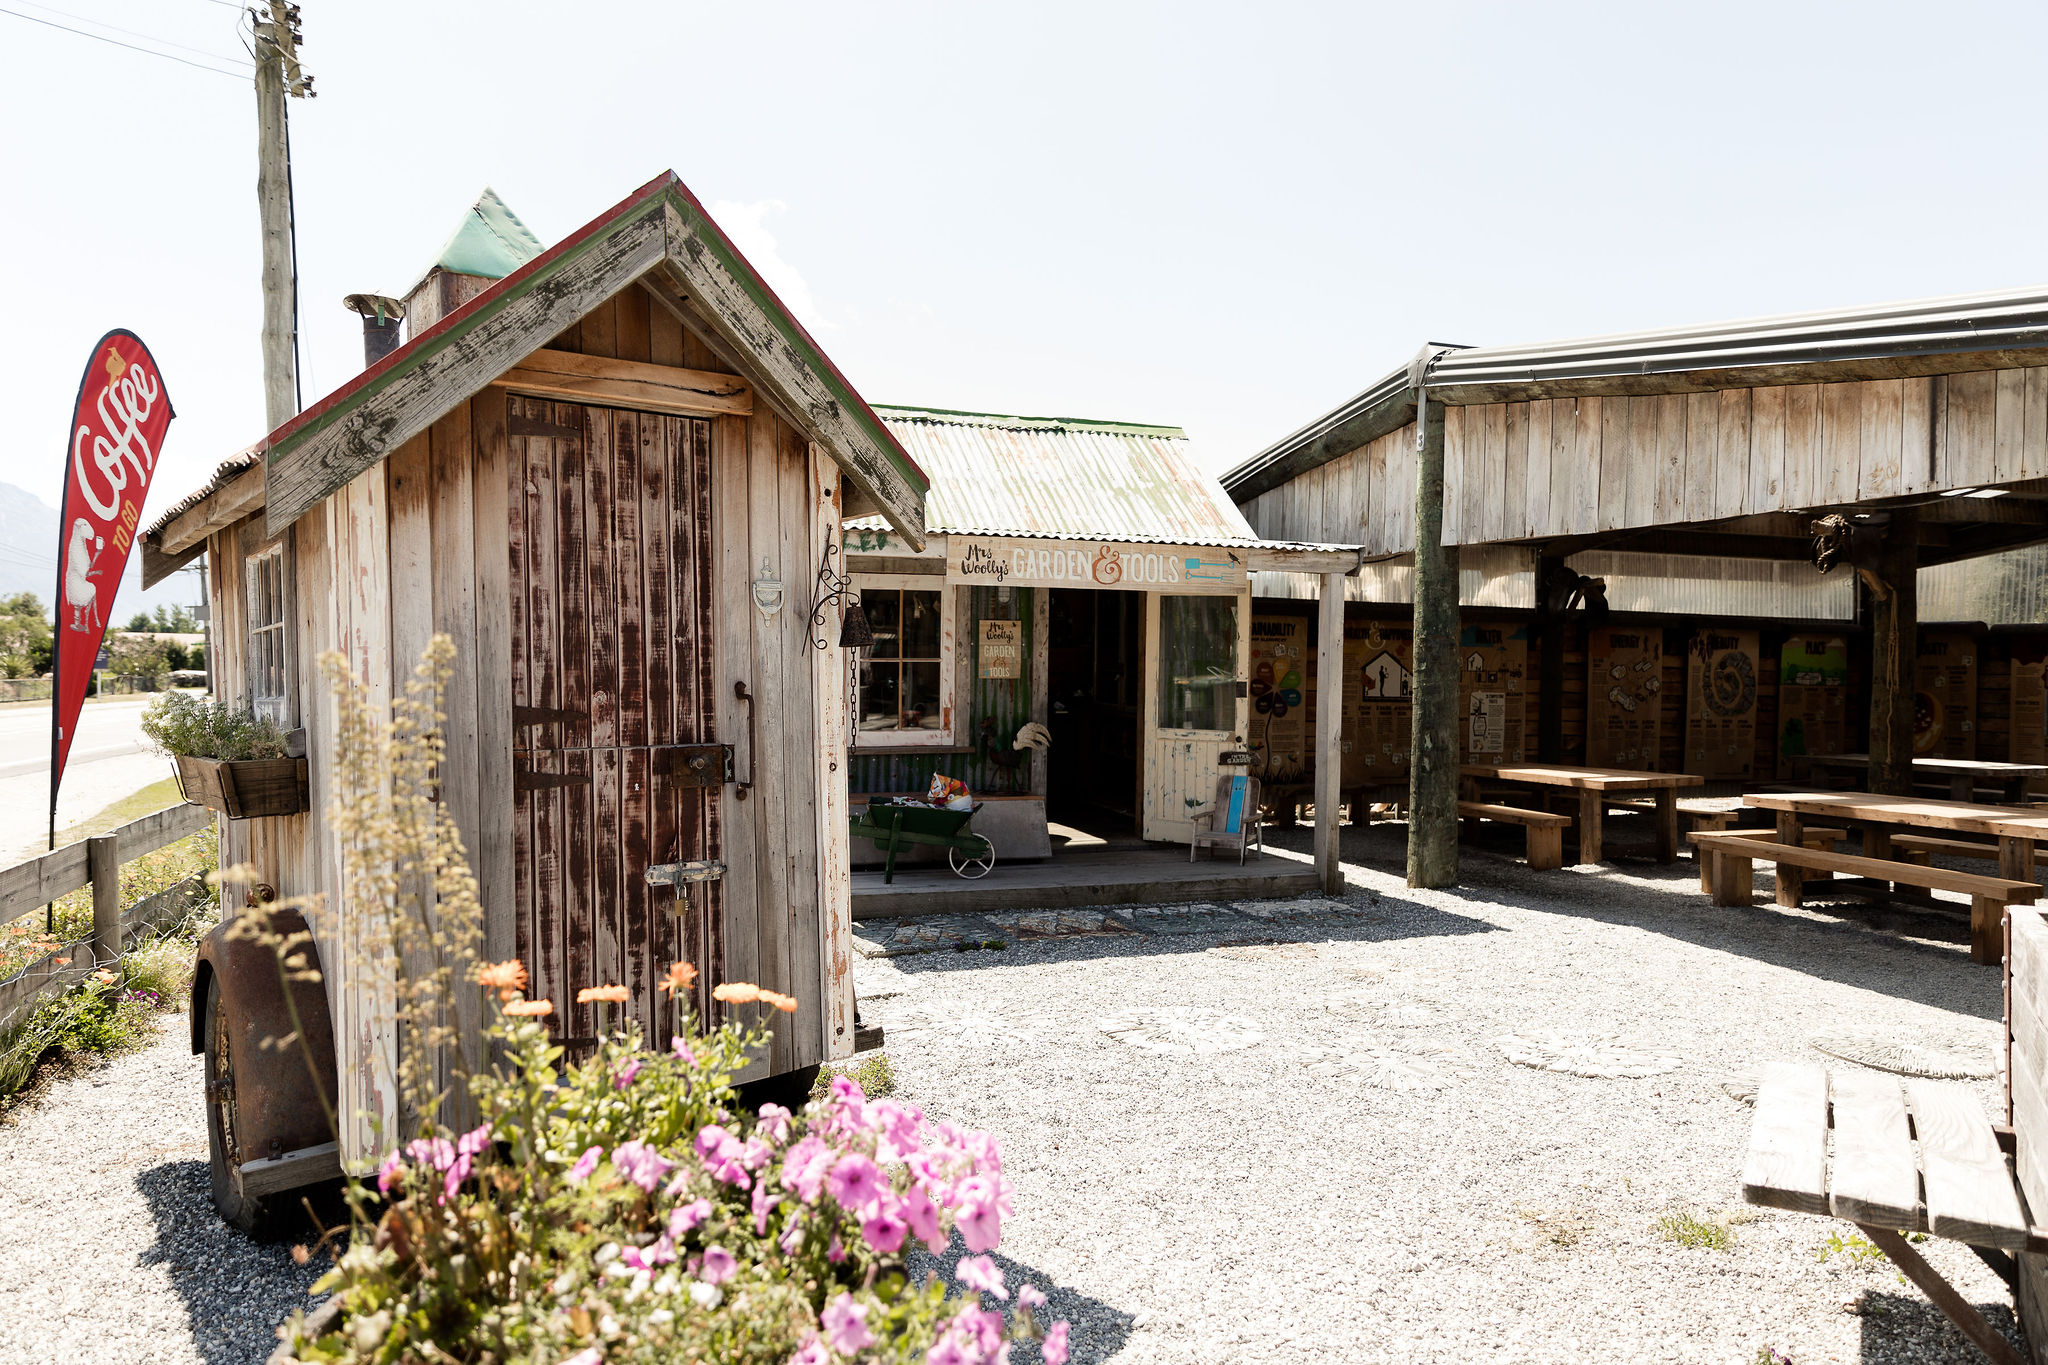 Mrs Woolly's General Store - Susan Miller Photography